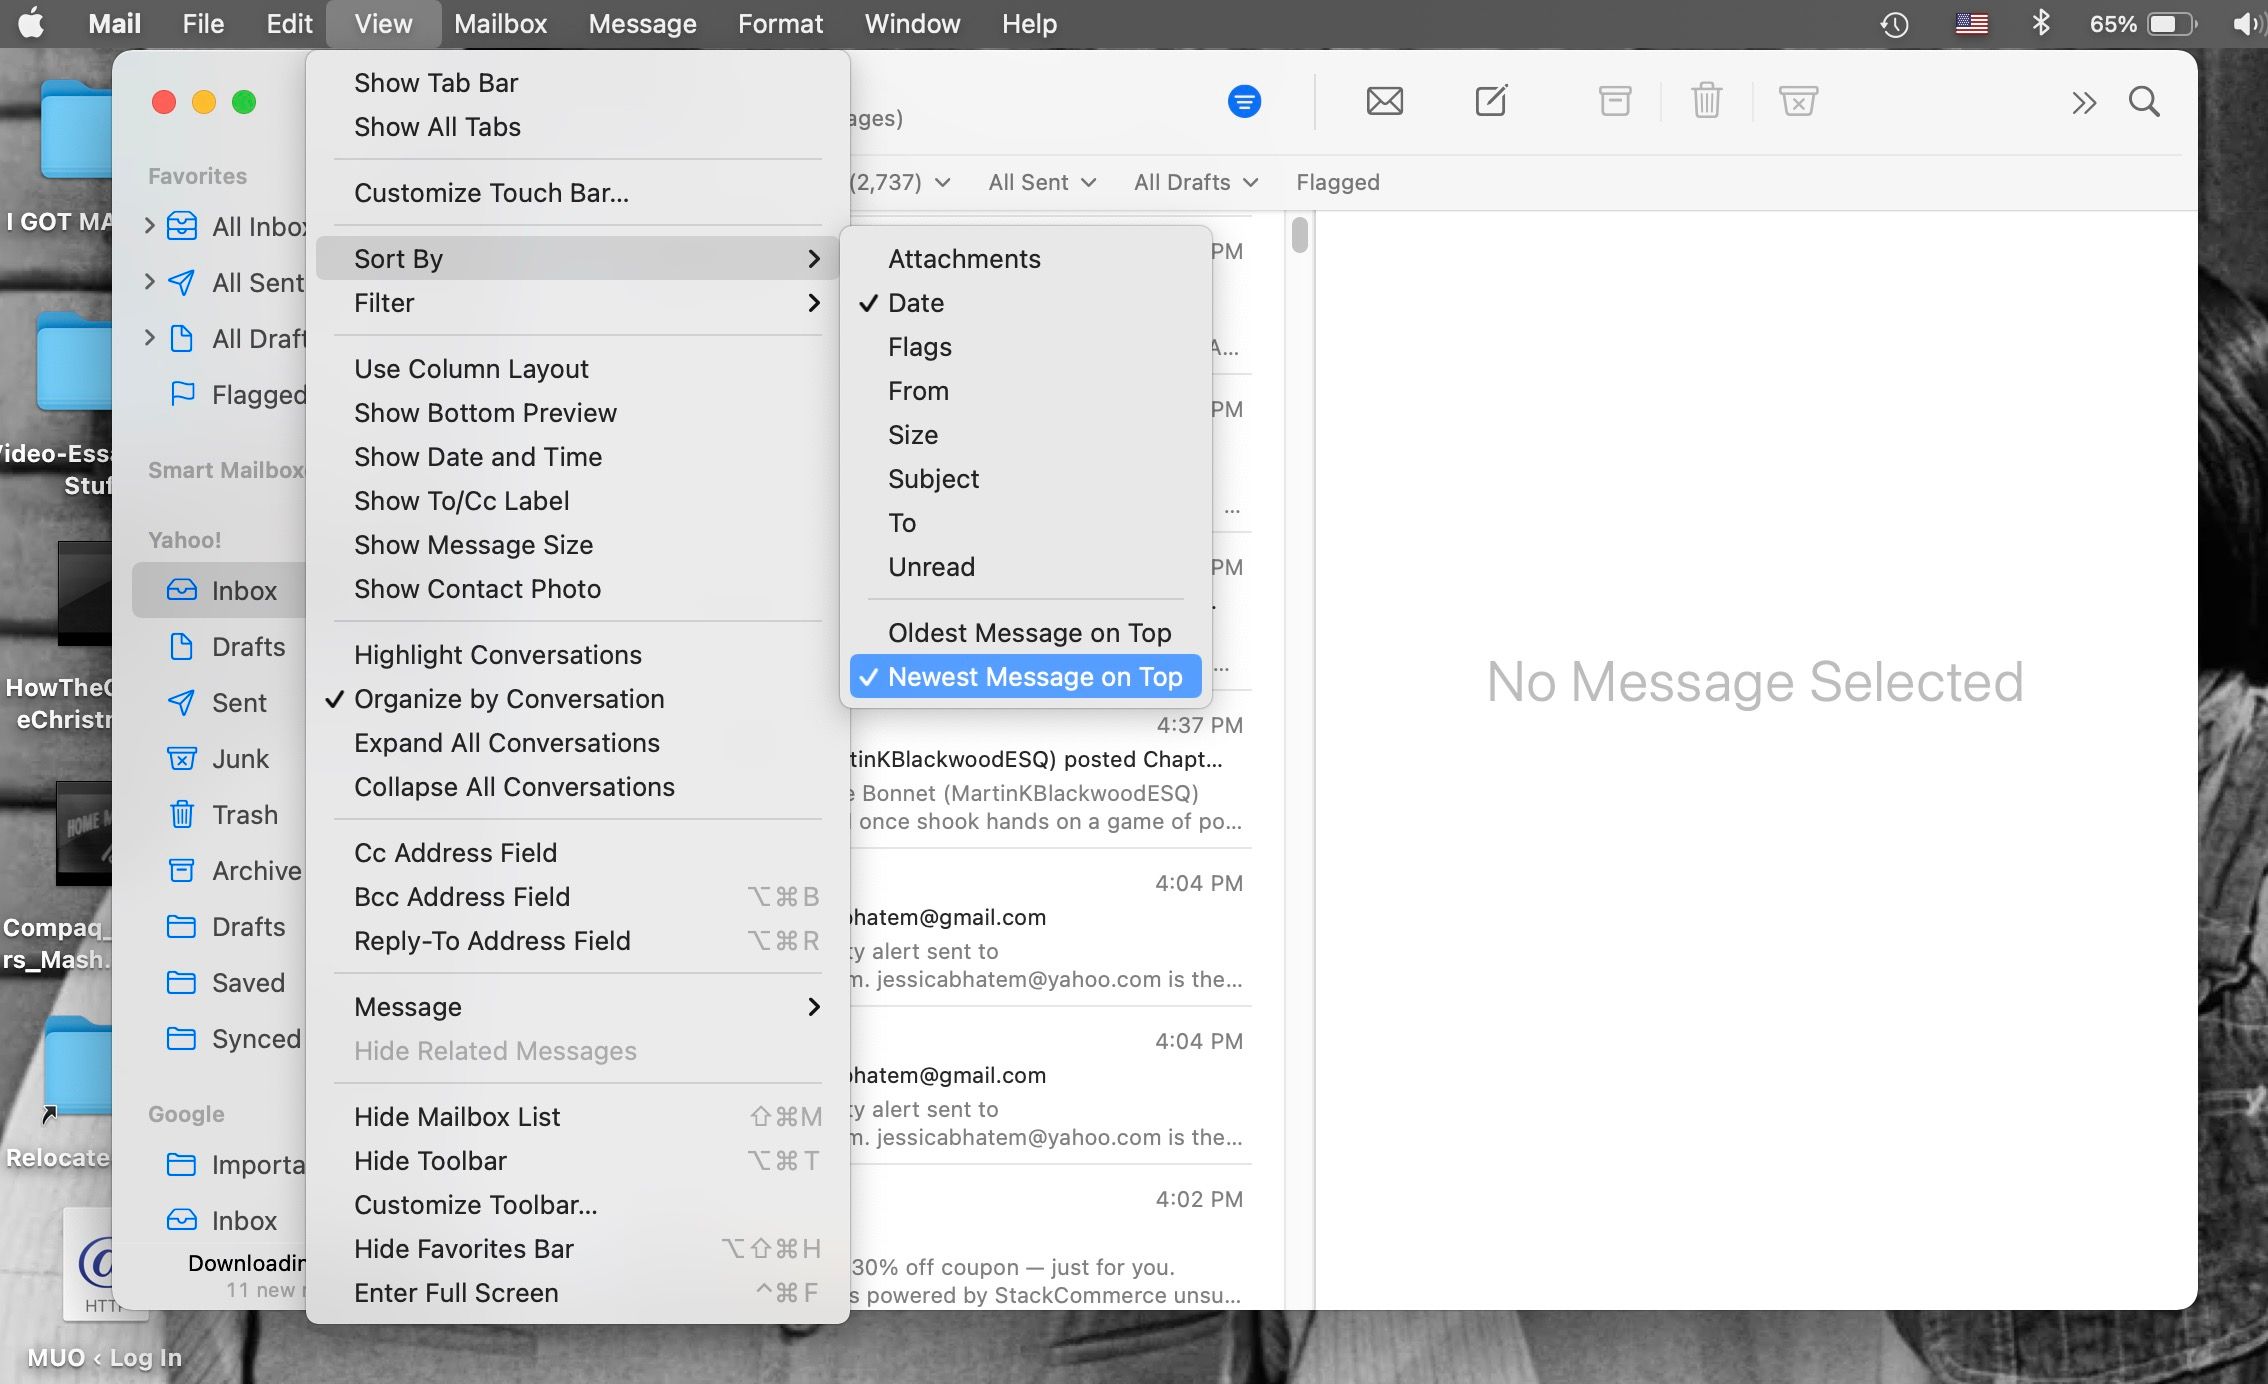 Sort By options displayed in Mail for Mac